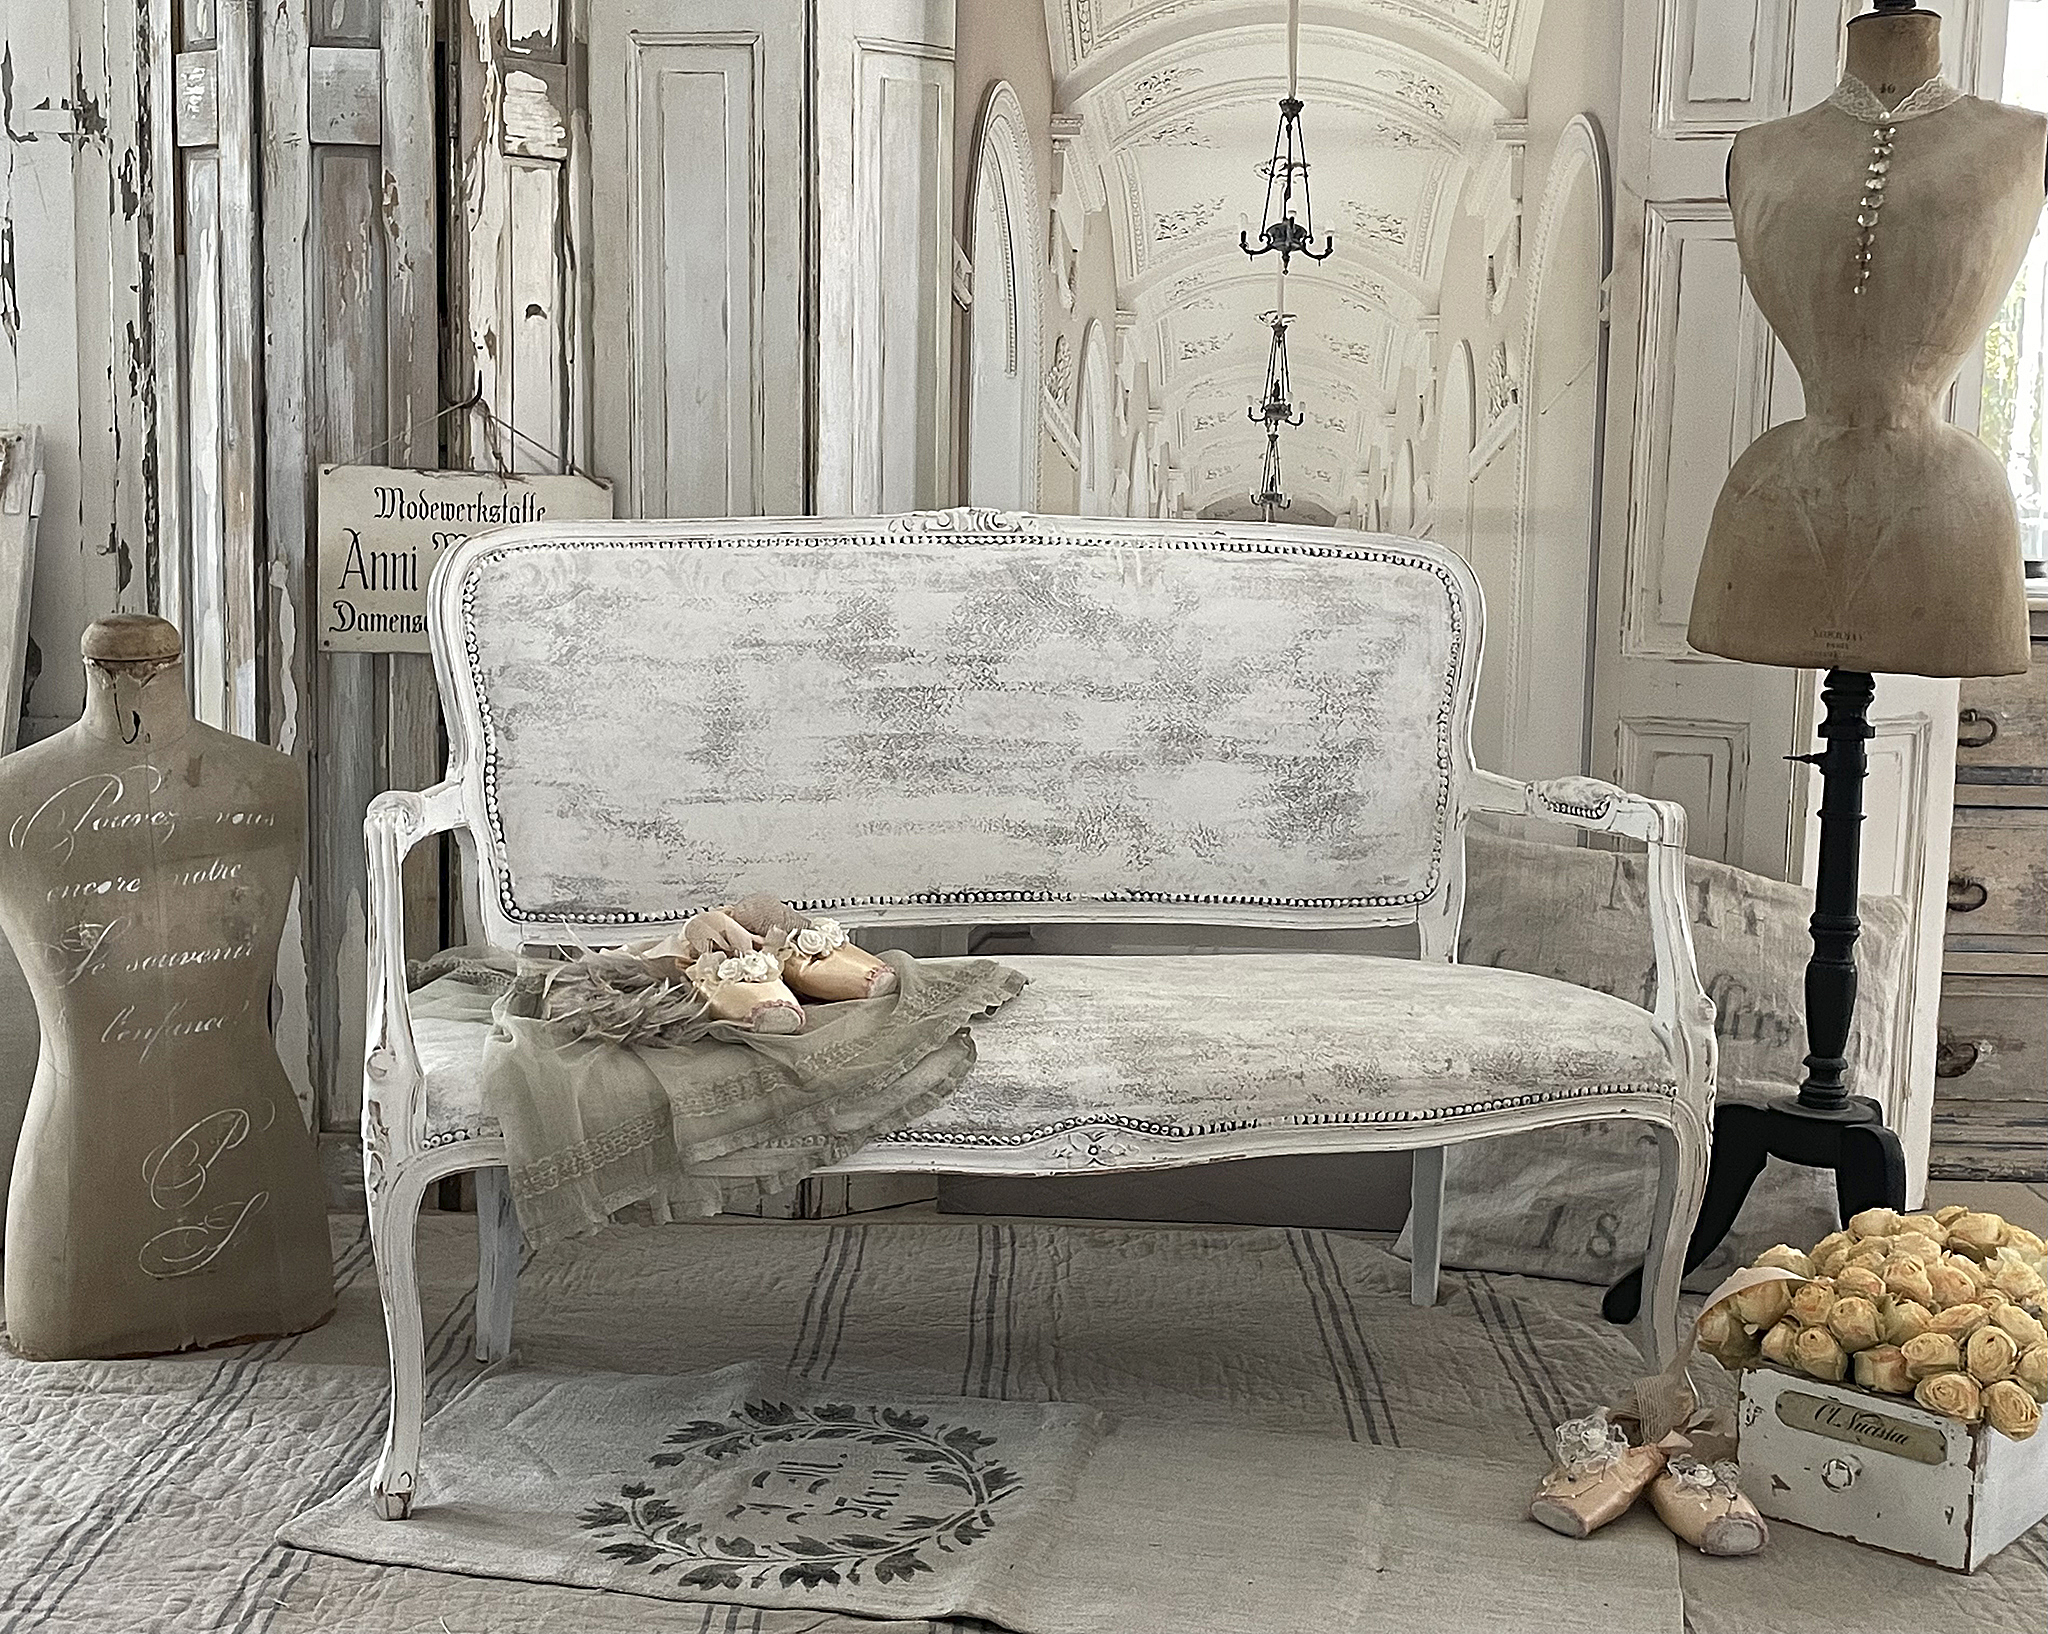 Reserviert! Louise Philippe Bank/ Shabby***